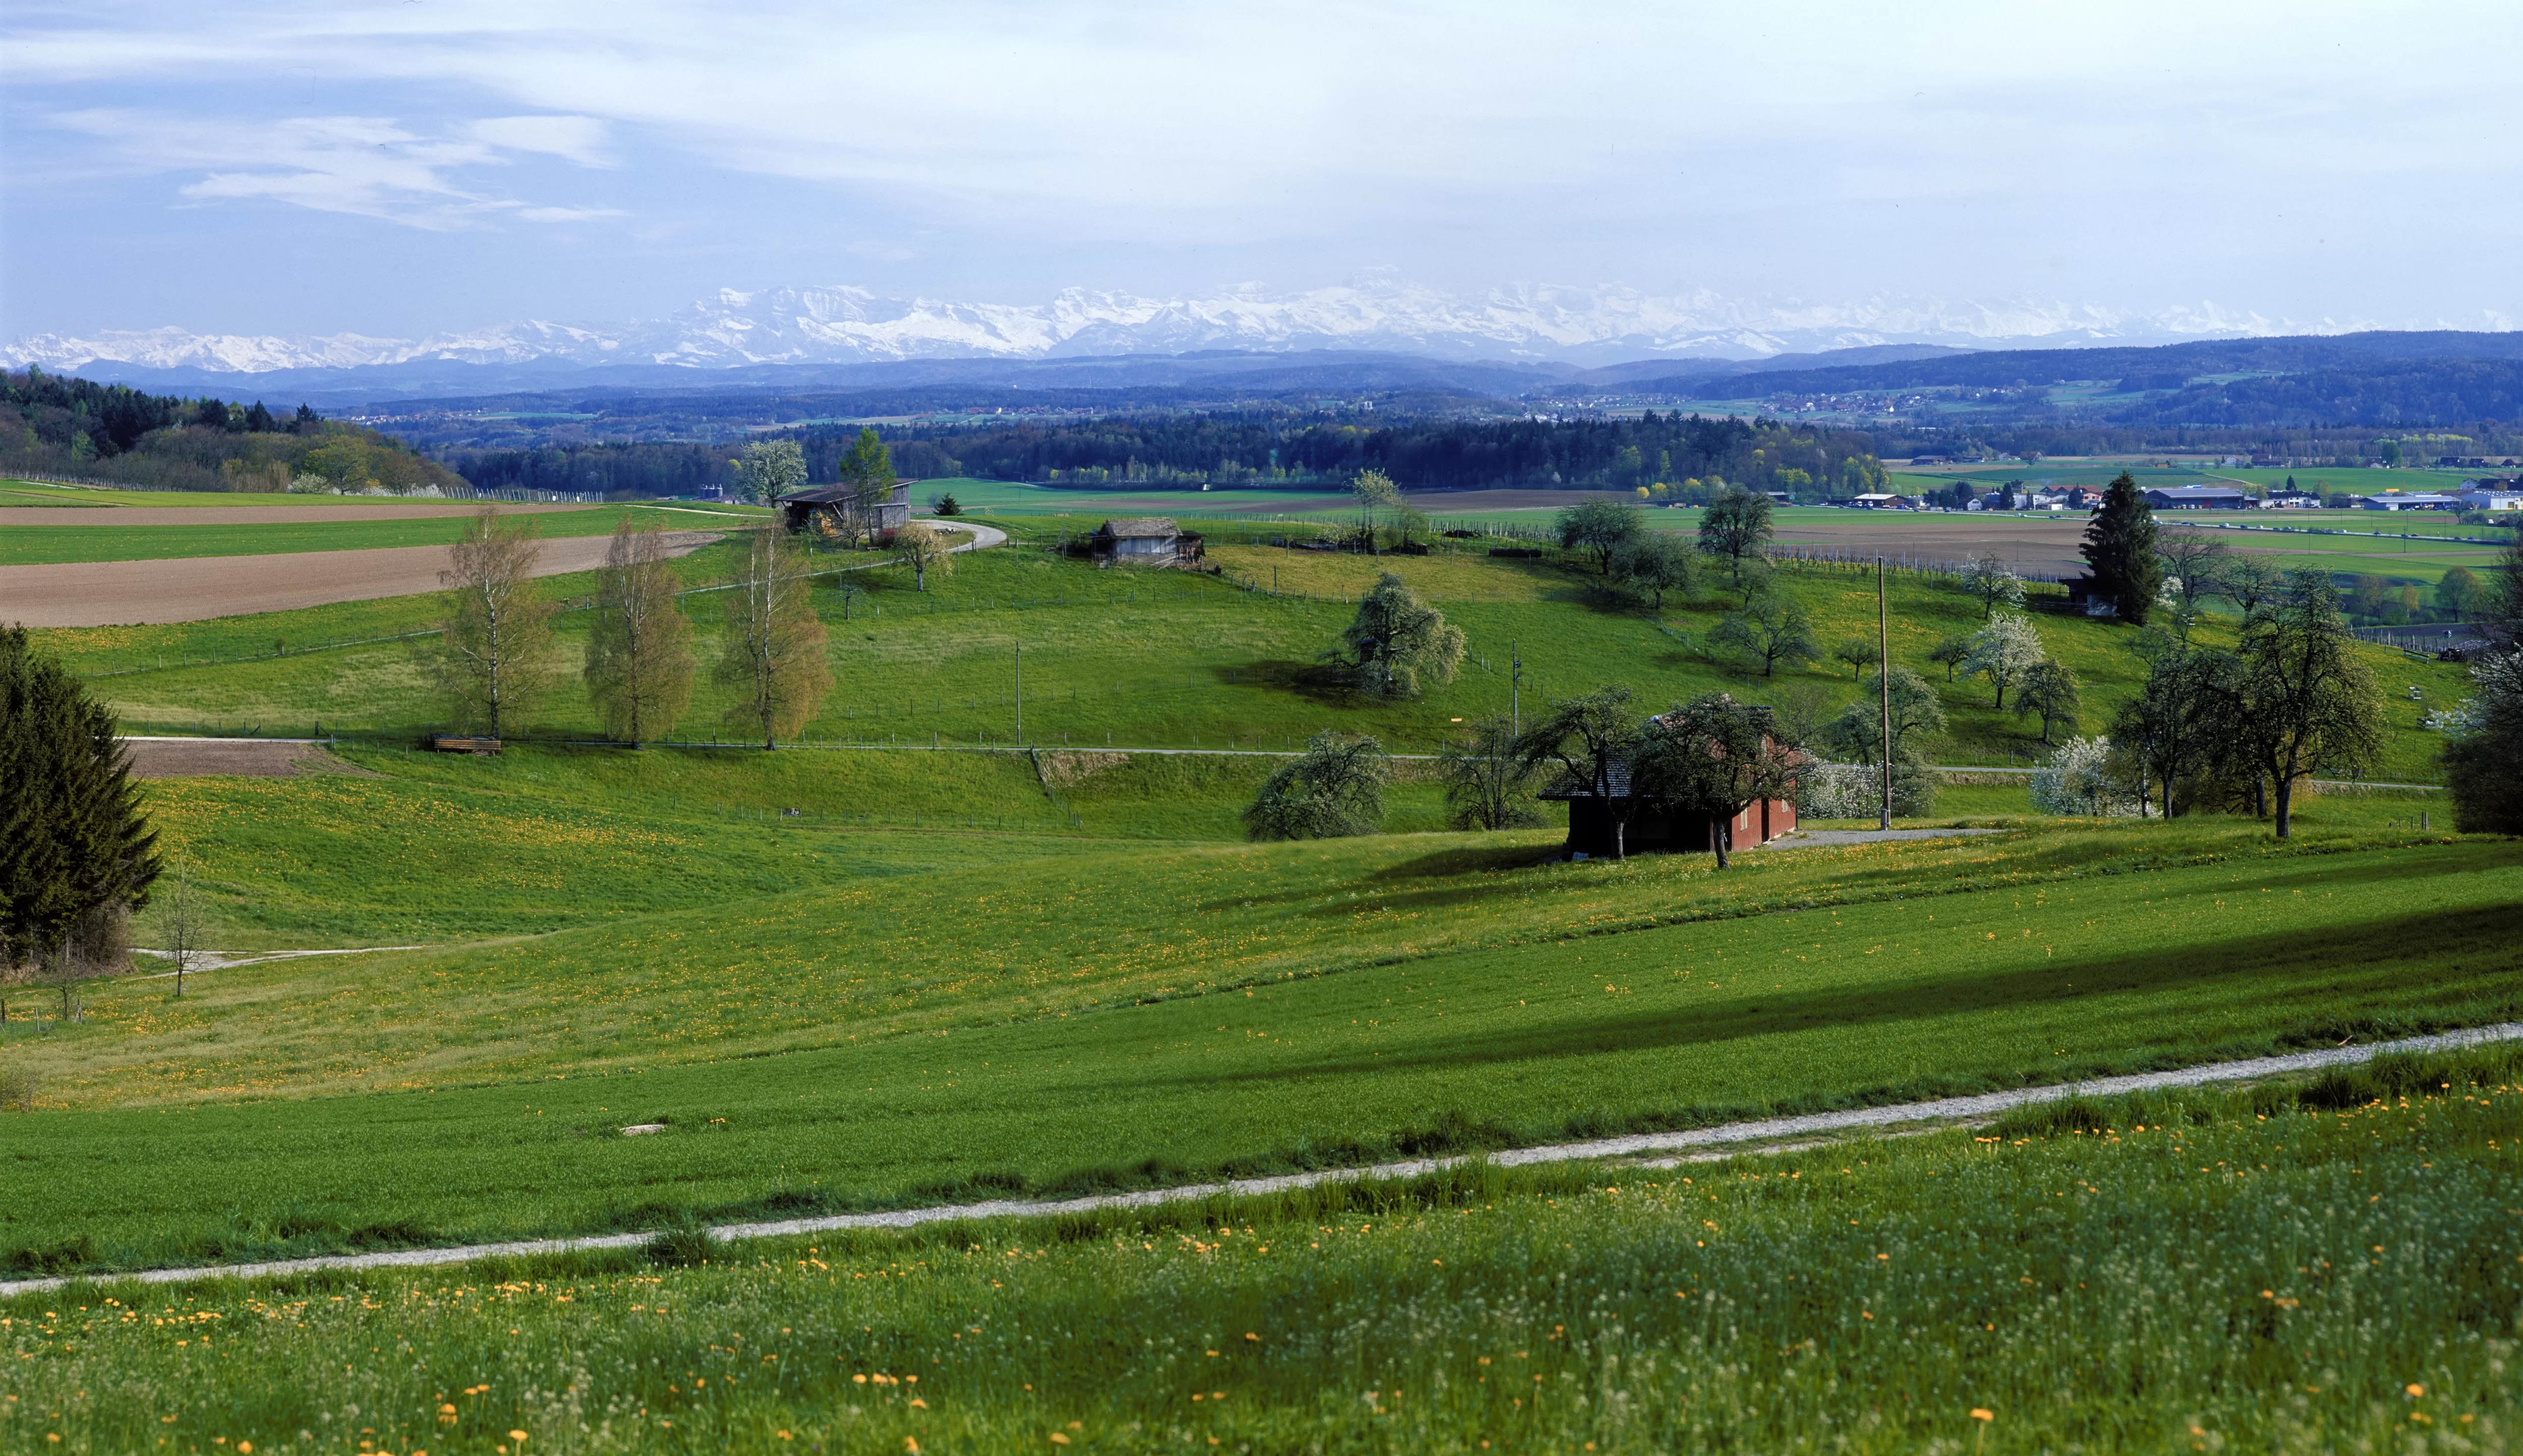 Landscape of the Zürcher Weinland with a view of the Molasse Basin to the Alps on the horizon. Photo: Nagra